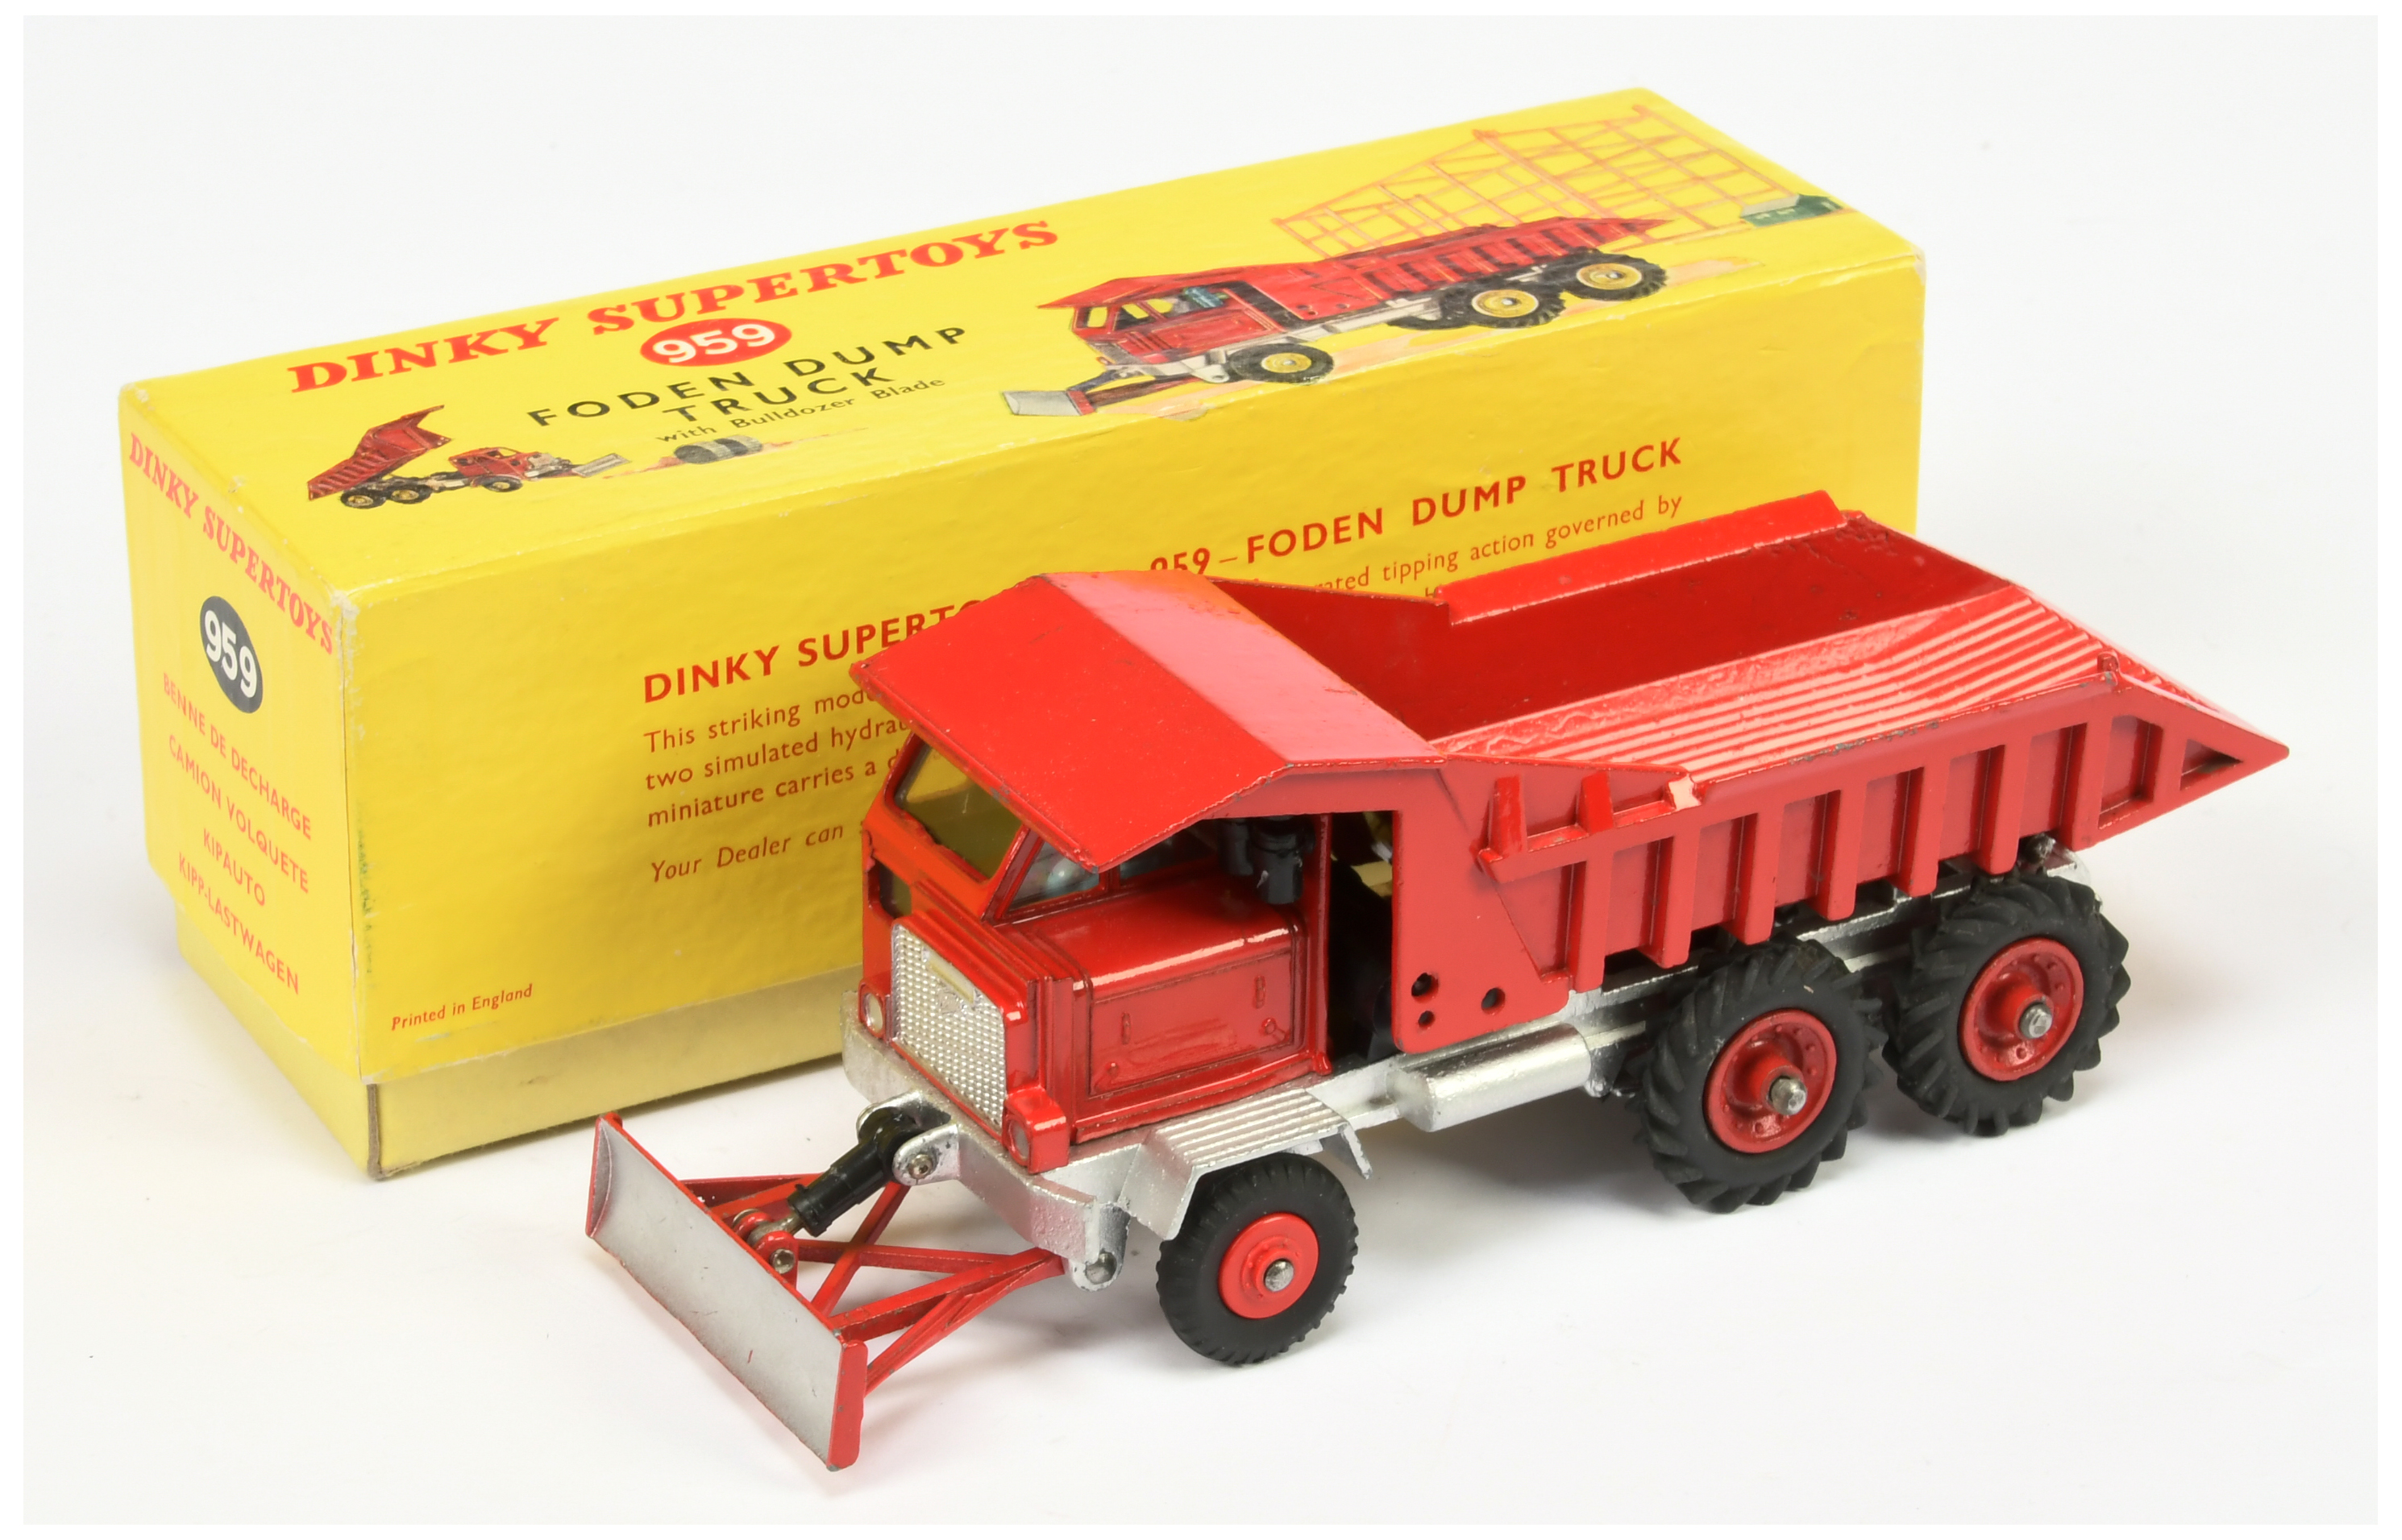 Dinky Toys 959 Foden Dump Truck With Bulldozer Blade - Red Cab, tipping back and hubs (plastic to...